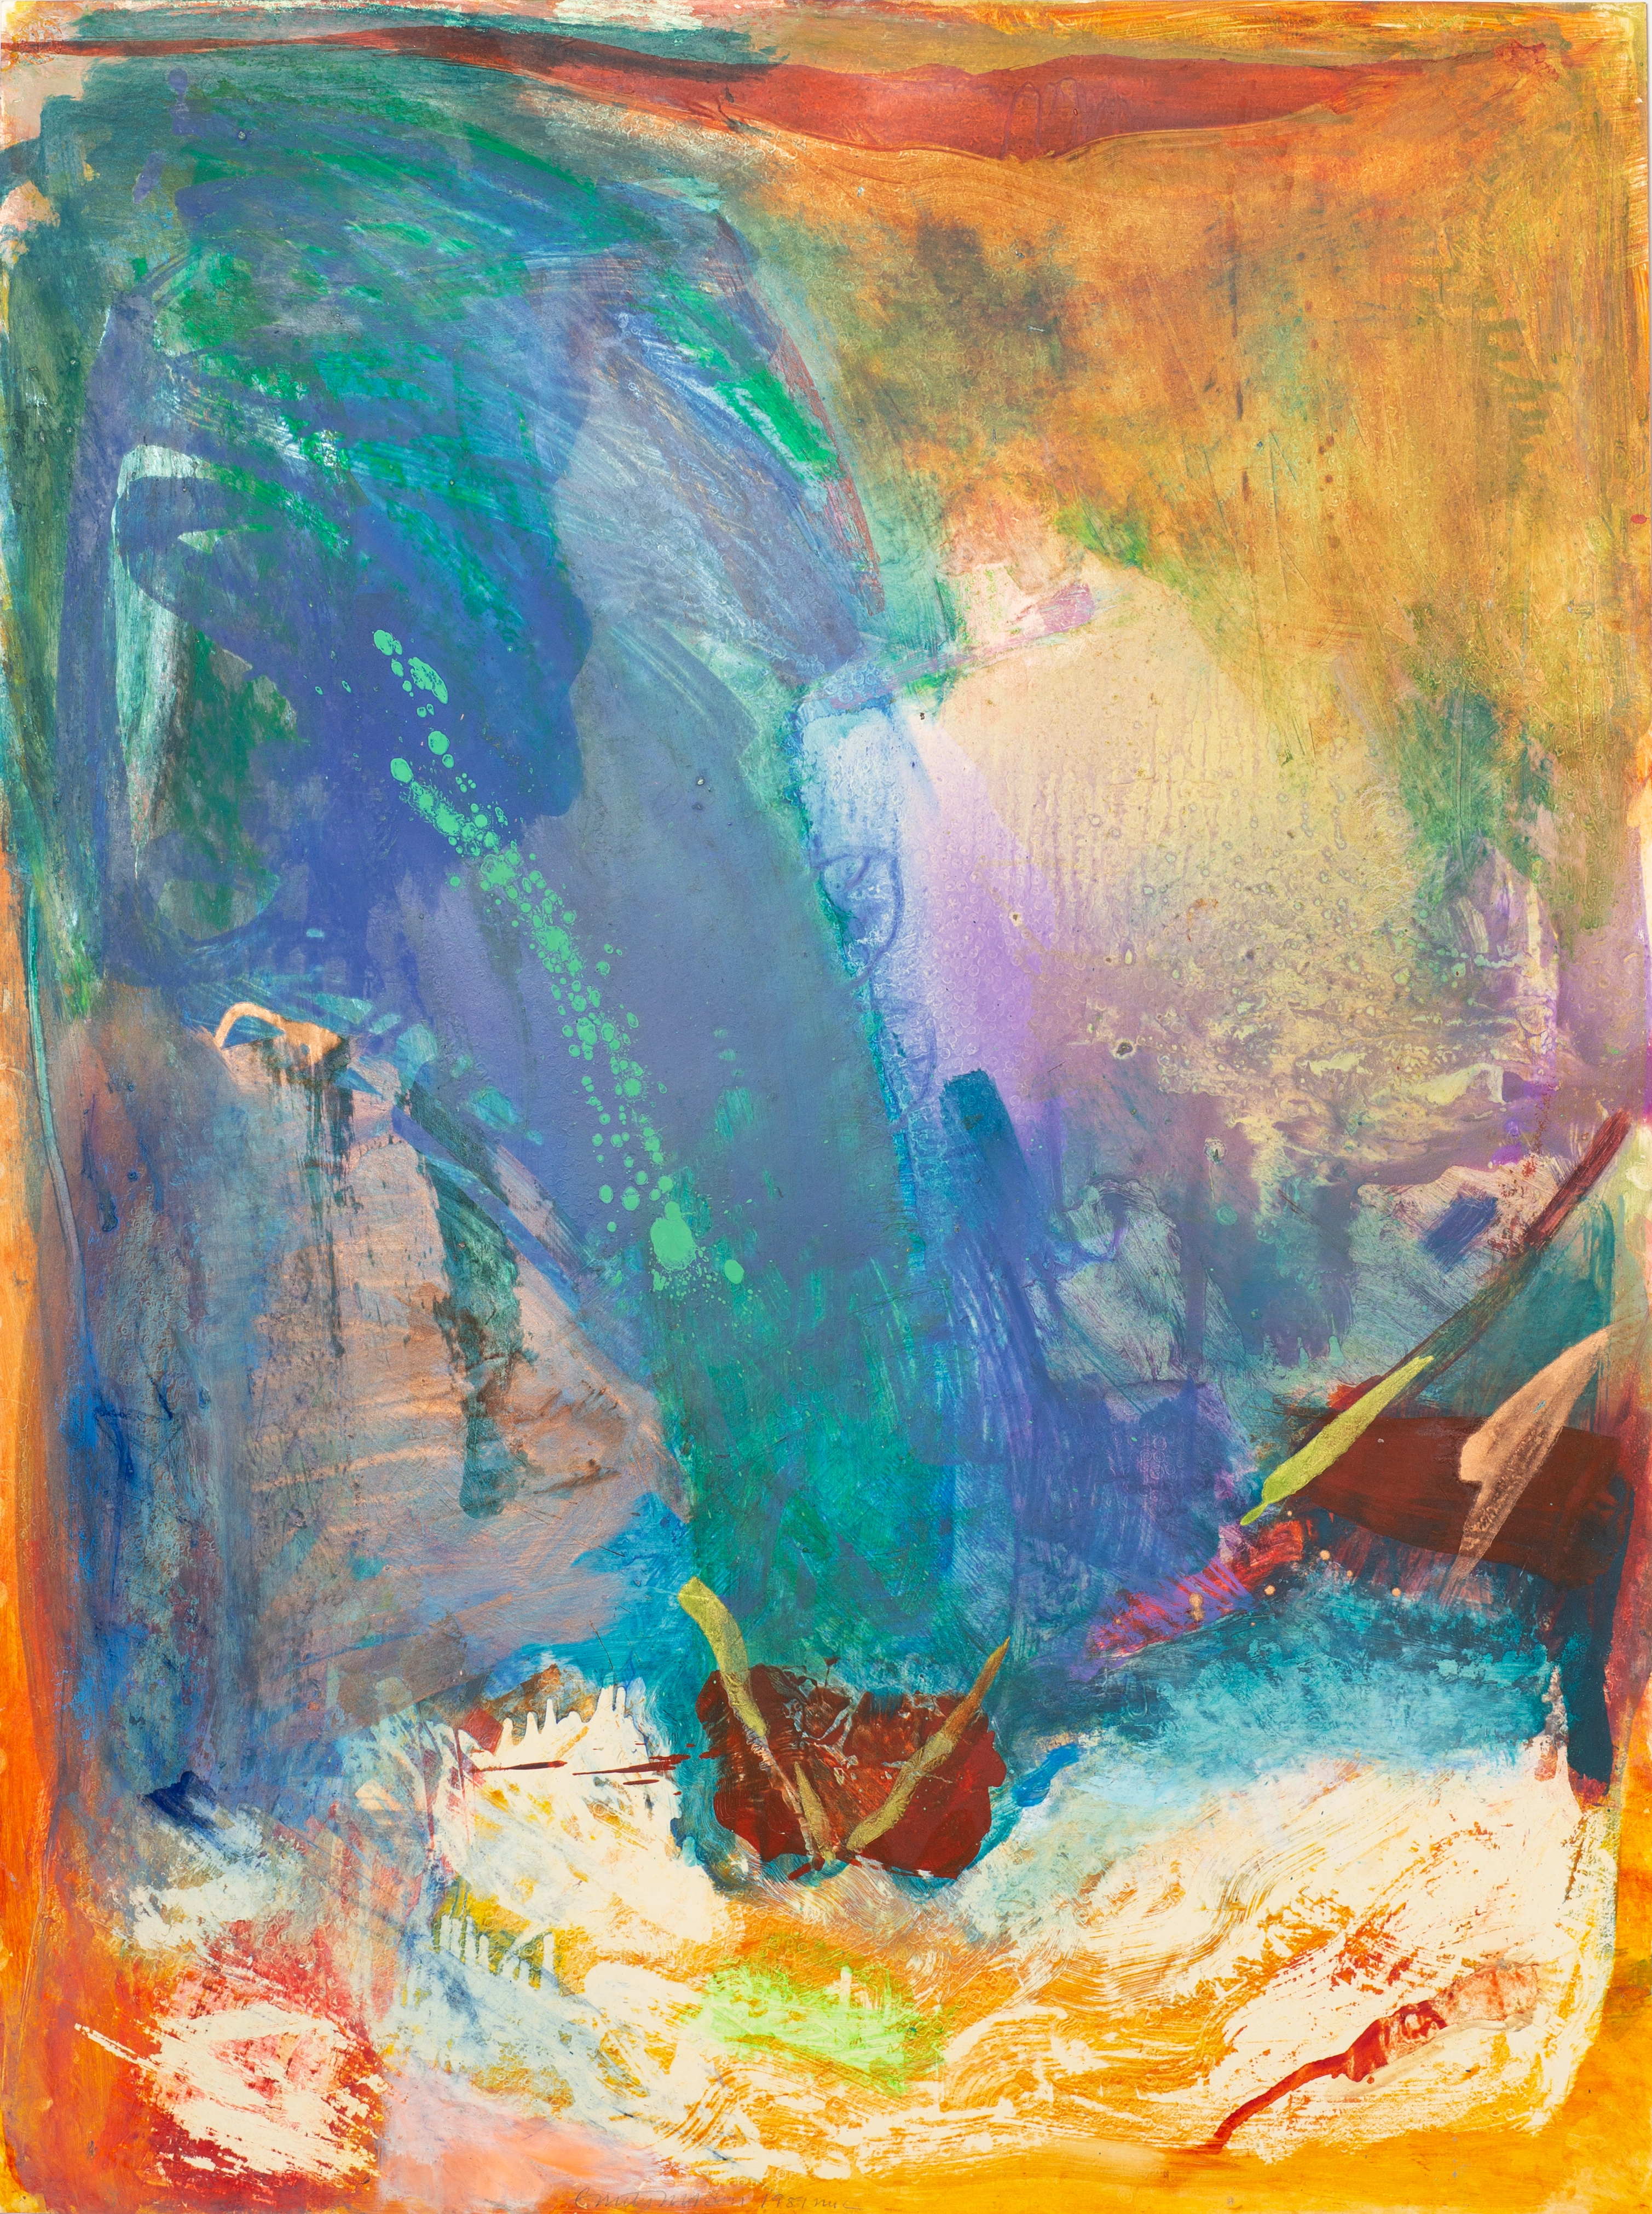 Abstract oil on paper work with brightly colored gestures and marks of blue, green, yellow, orange, and red.